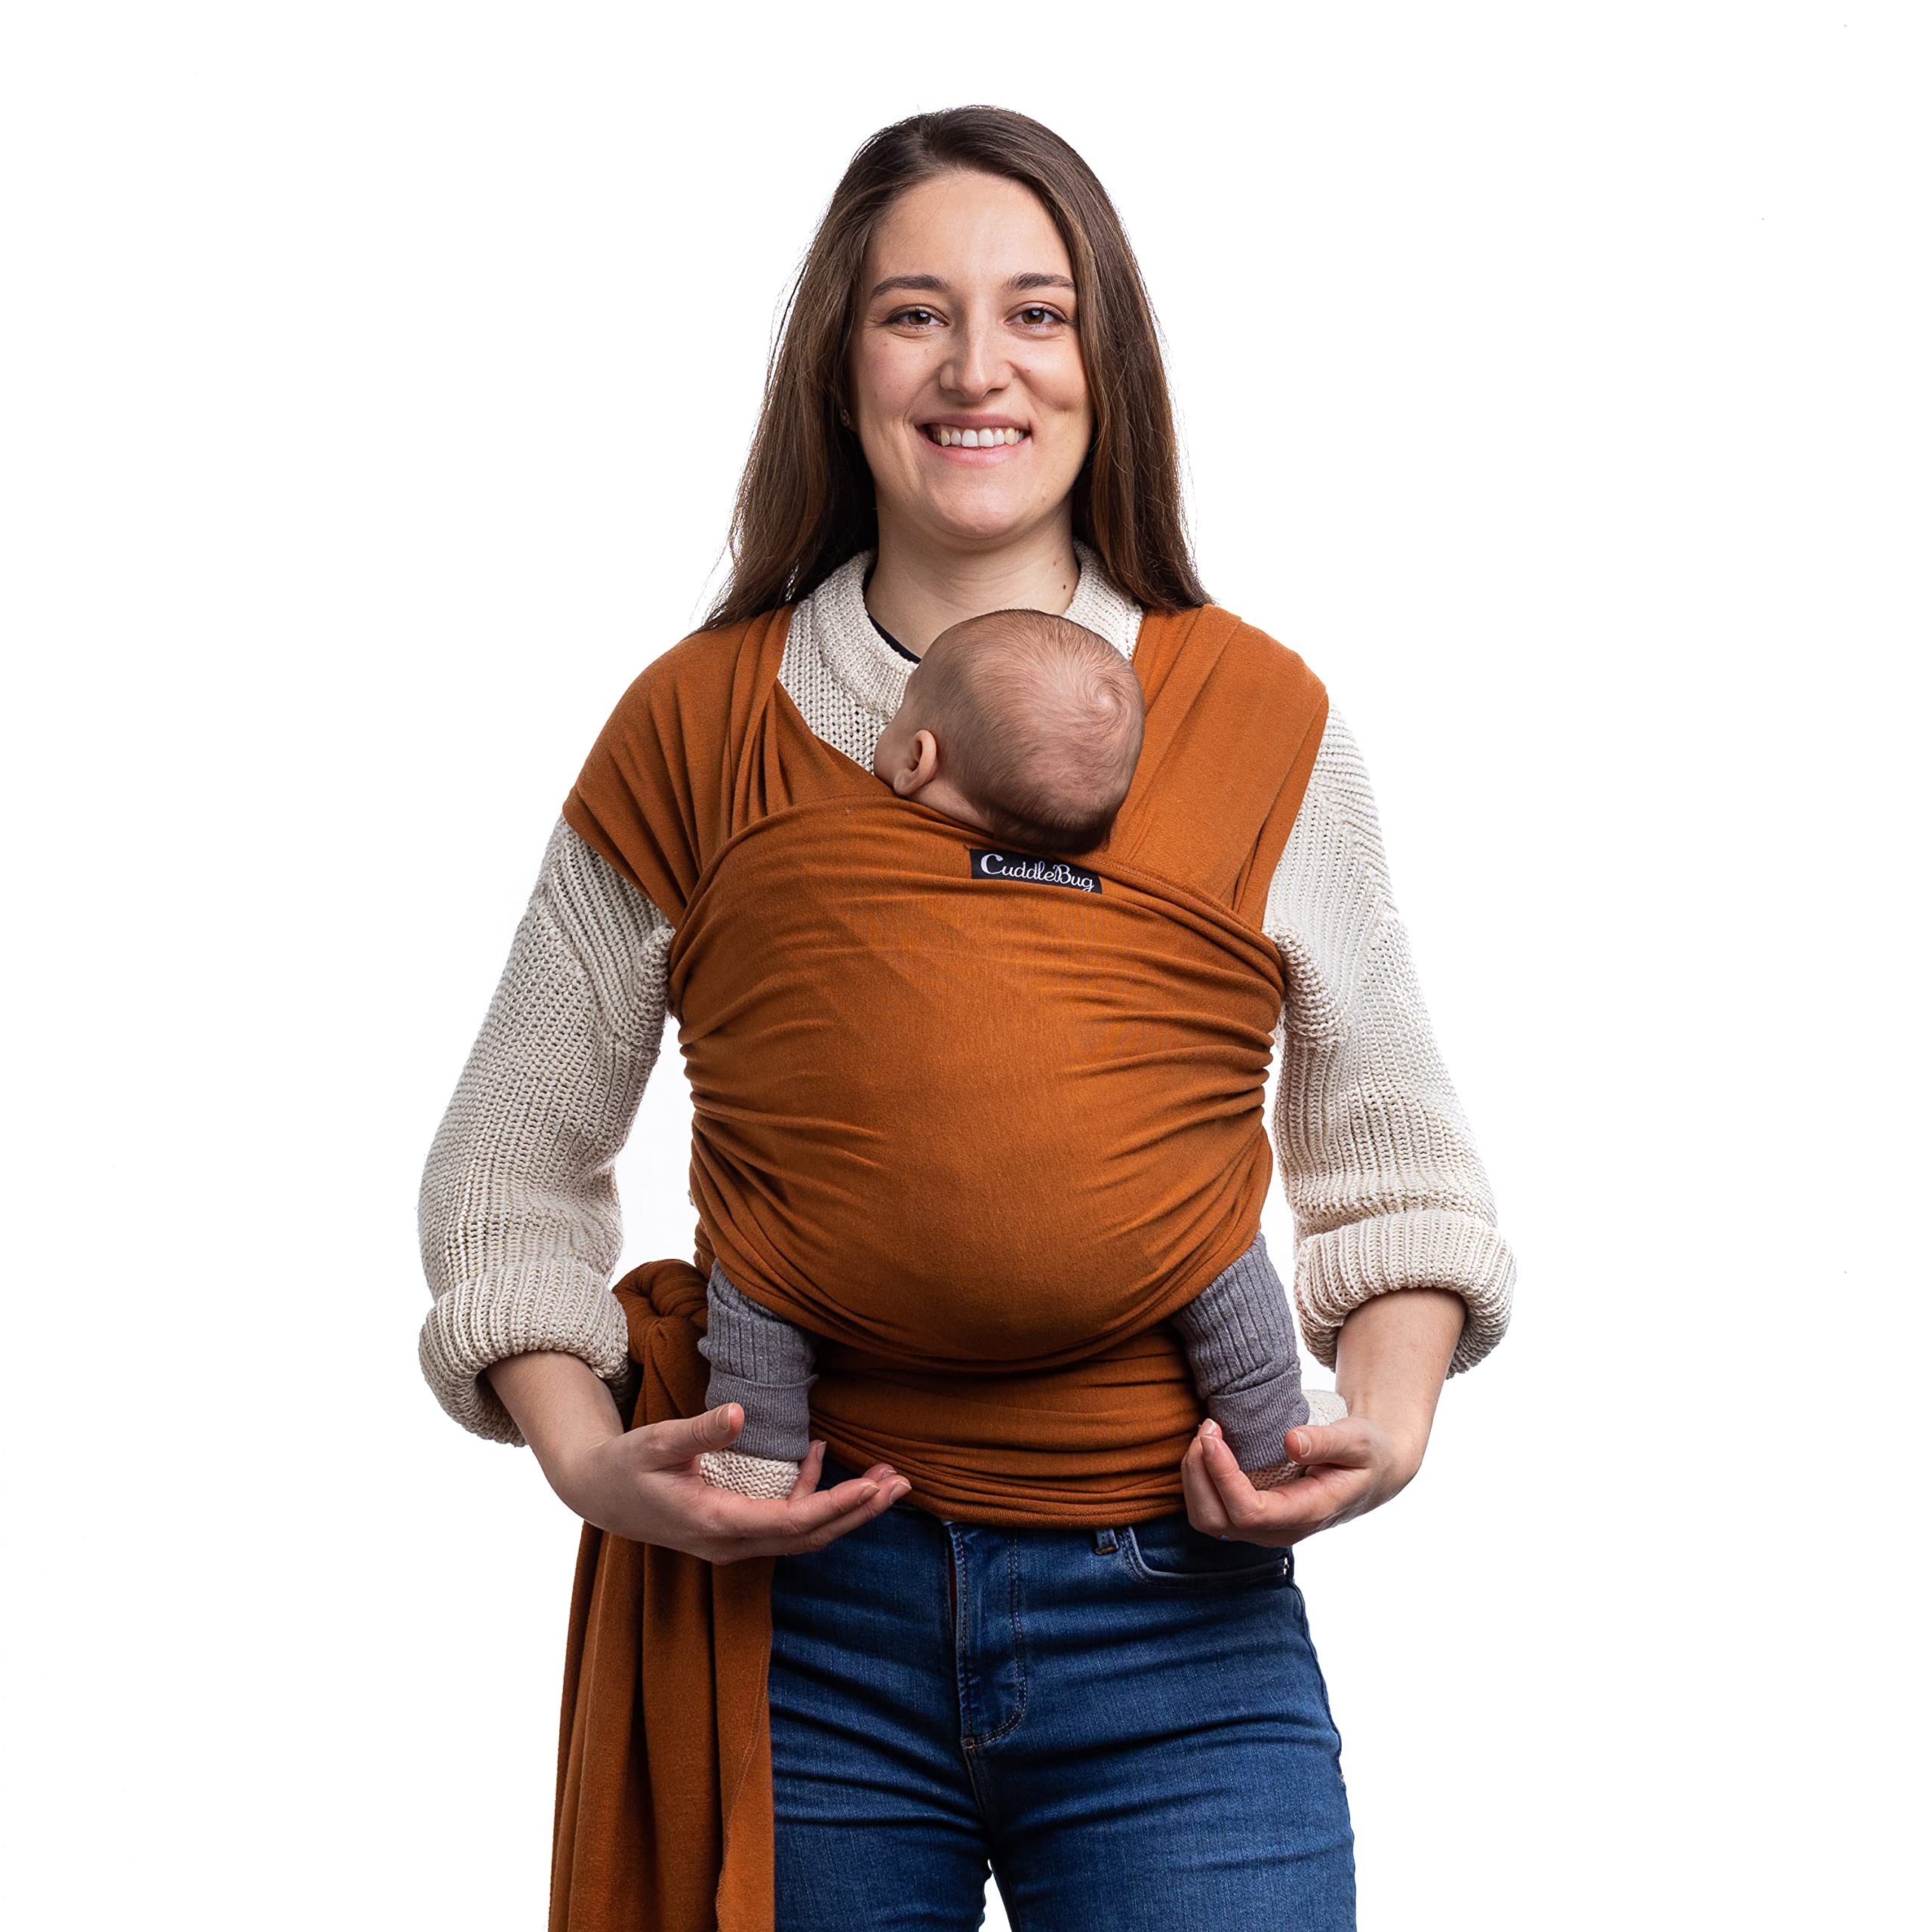 cuddlebug Baby Wrap - Hands-Free Baby carrier Wrap - Soft & Stretchy Baby Wraps carrier - Baby carrier Newborn to Toddler 7-35 l